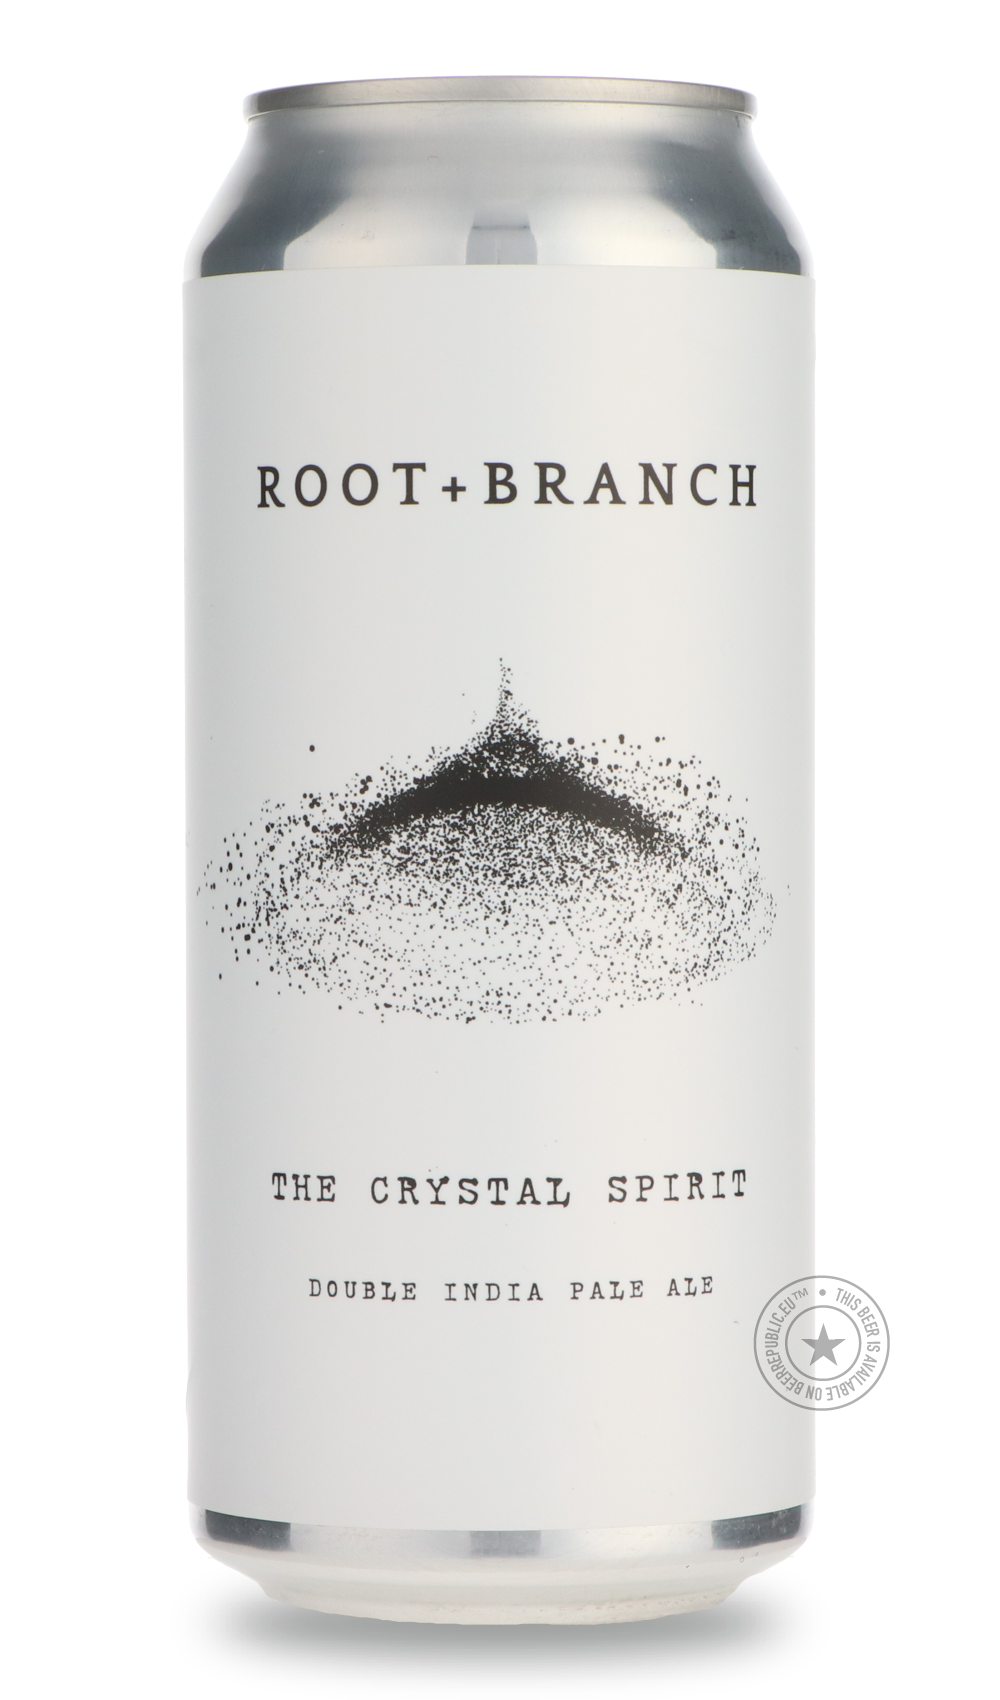 -Root + Branch- The Crystal Spirit-IPA- Only @ Beer Republic - The best online beer store for American & Canadian craft beer - Buy beer online from the USA and Canada - Bier online kopen - Amerikaans bier kopen - Craft beer store - Craft beer kopen - Amerikanisch bier kaufen - Bier online kaufen - Acheter biere online - IPA - Stout - Porter - New England IPA - Hazy IPA - Imperial Stout - Barrel Aged - Barrel Aged Imperial Stout - Brown - Dark beer - Blond - Blonde - Pilsner - Lager - Wheat - Weizen - Amber 